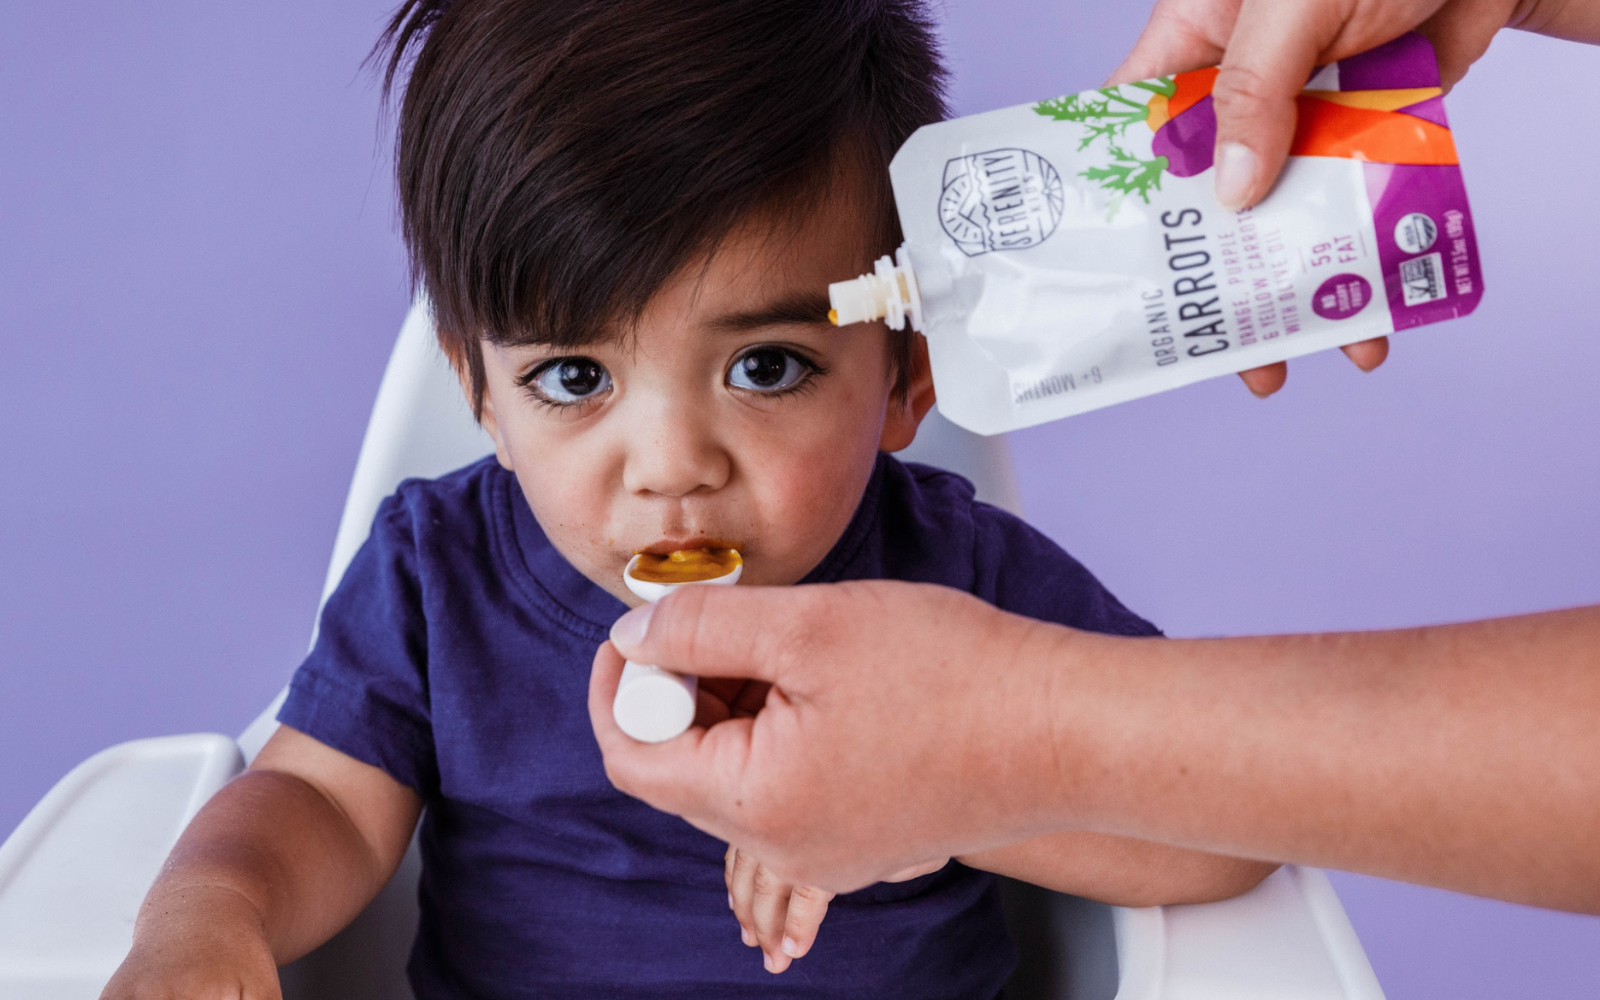 Starting Baby on Solids: Our Ultimate Guide for How to Introduce Food